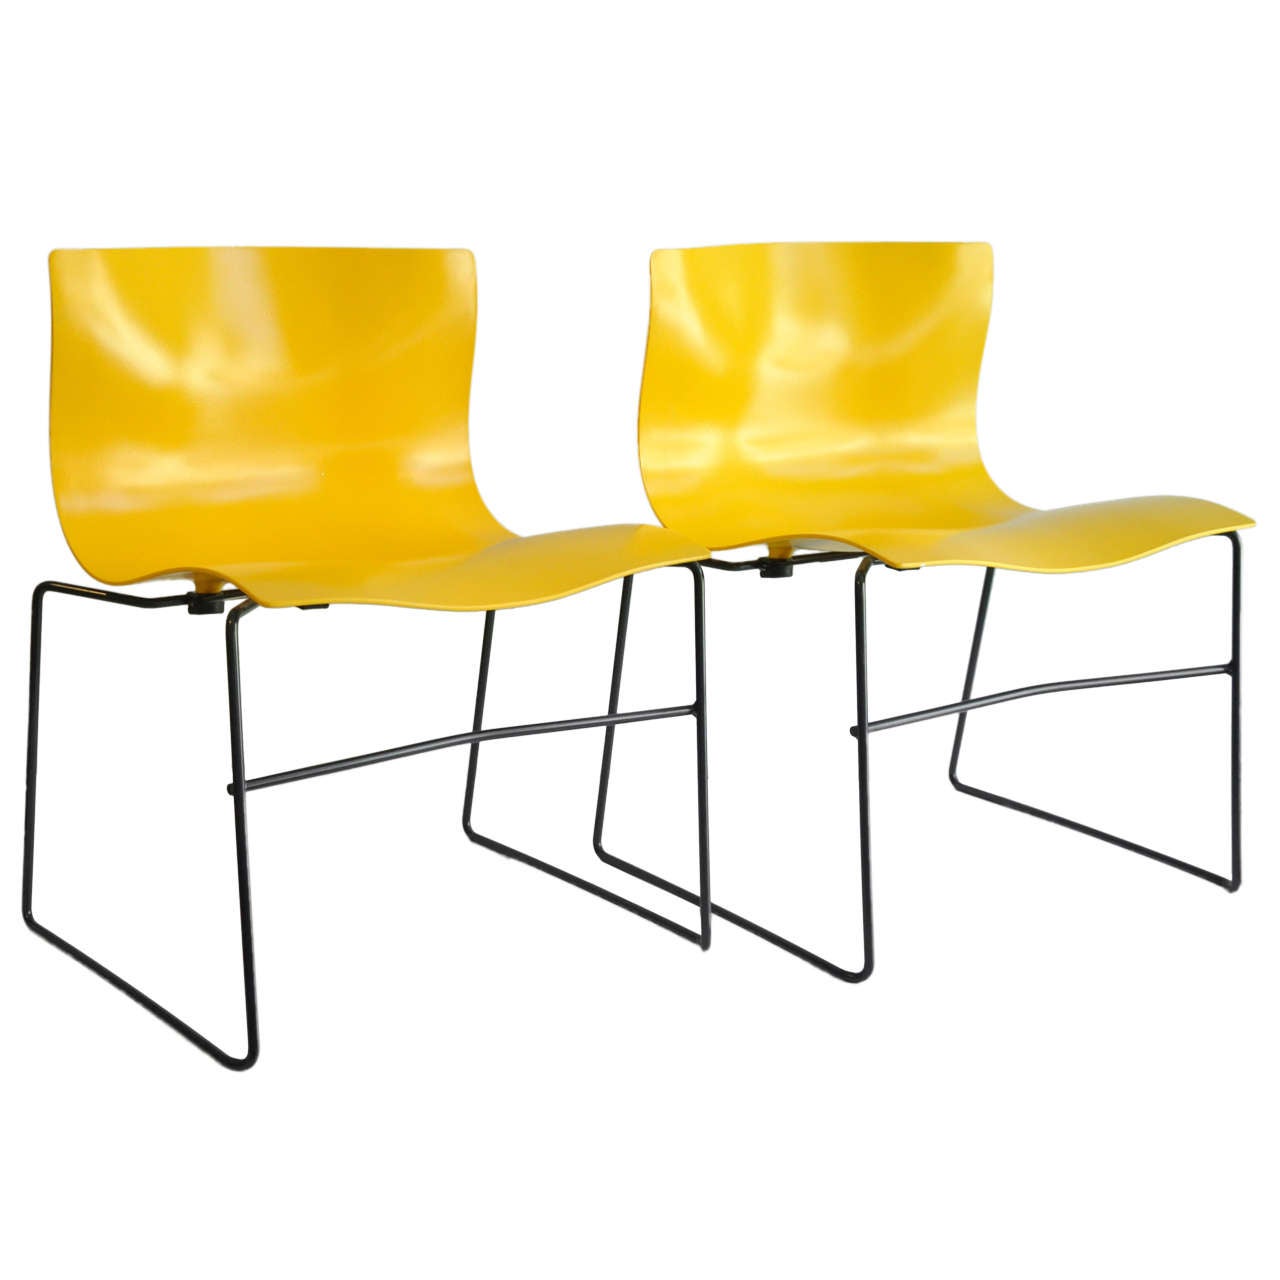 Pair of Vintage Handkerchief Chairs by Vignelli for Knoll